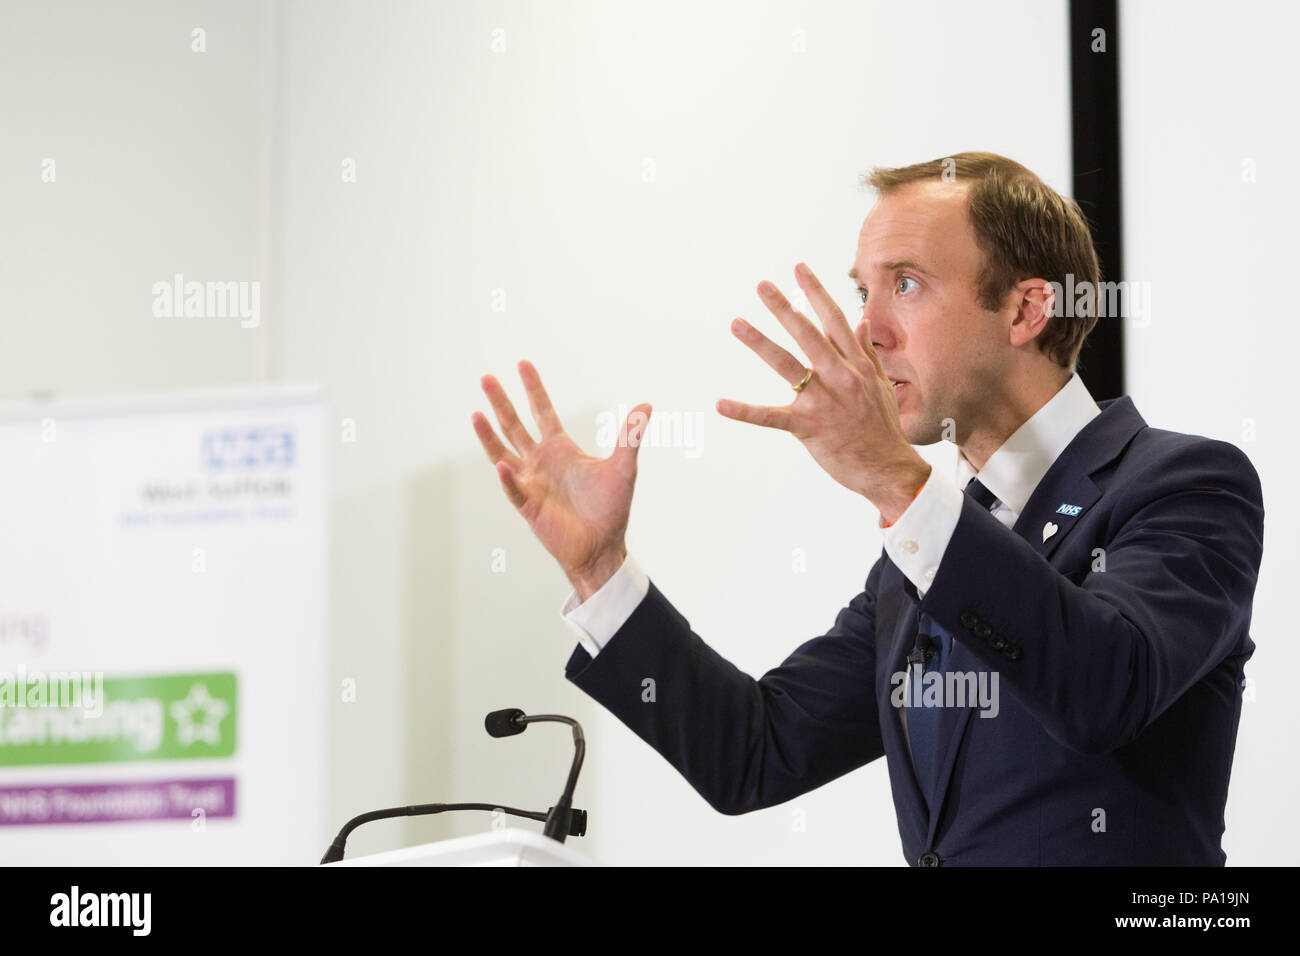 Bury St Edmunds, UK. 20th July 2018. Matt Hancock newly appointed Health and Social Care Secretary unveils nearly half a billion pounds funding to NHS, at the West Suffolk Hospital. Stock Photo